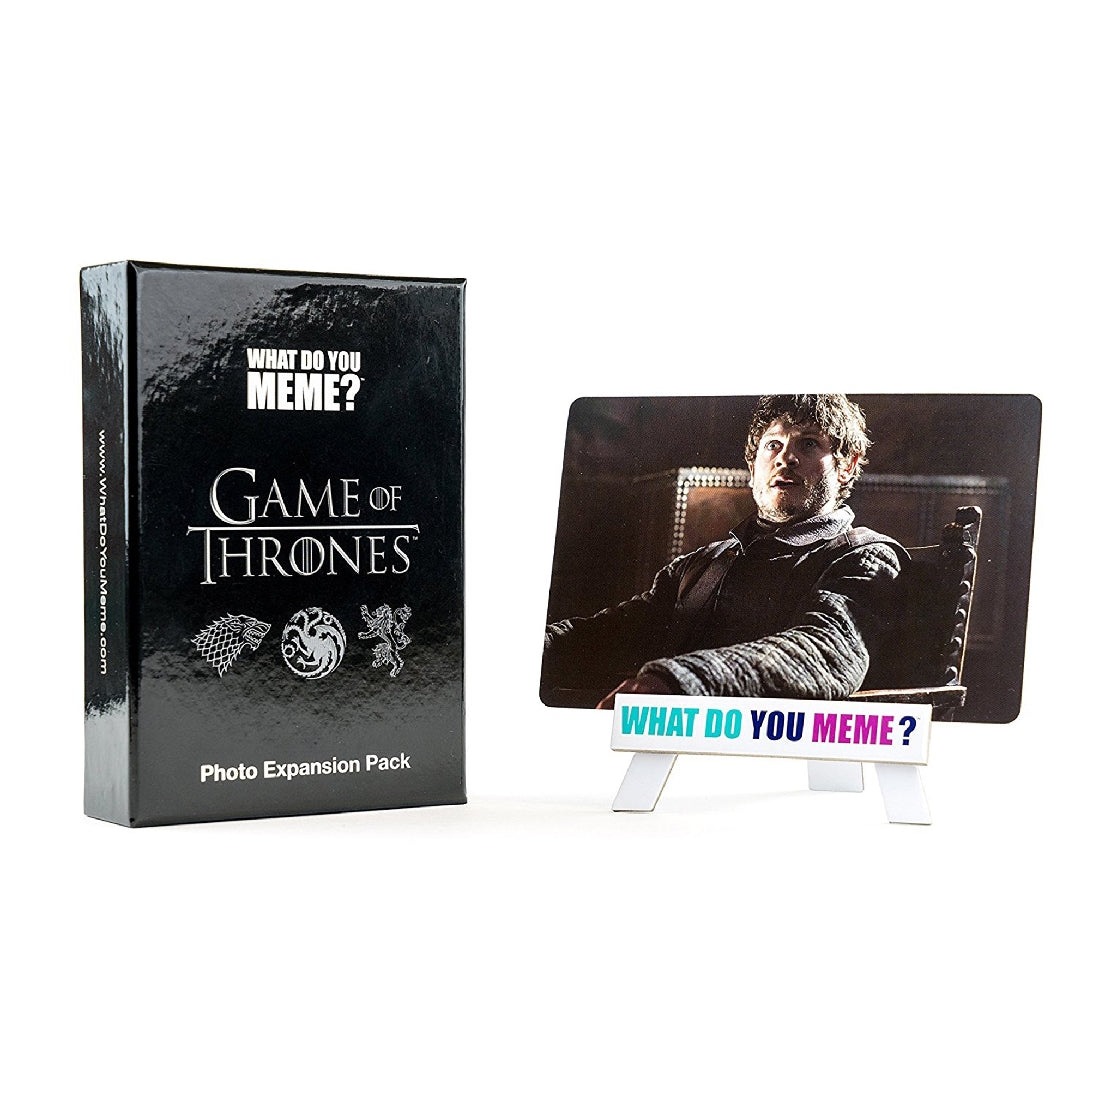 GAMES OF THRONE MEME EXPANSION PACK